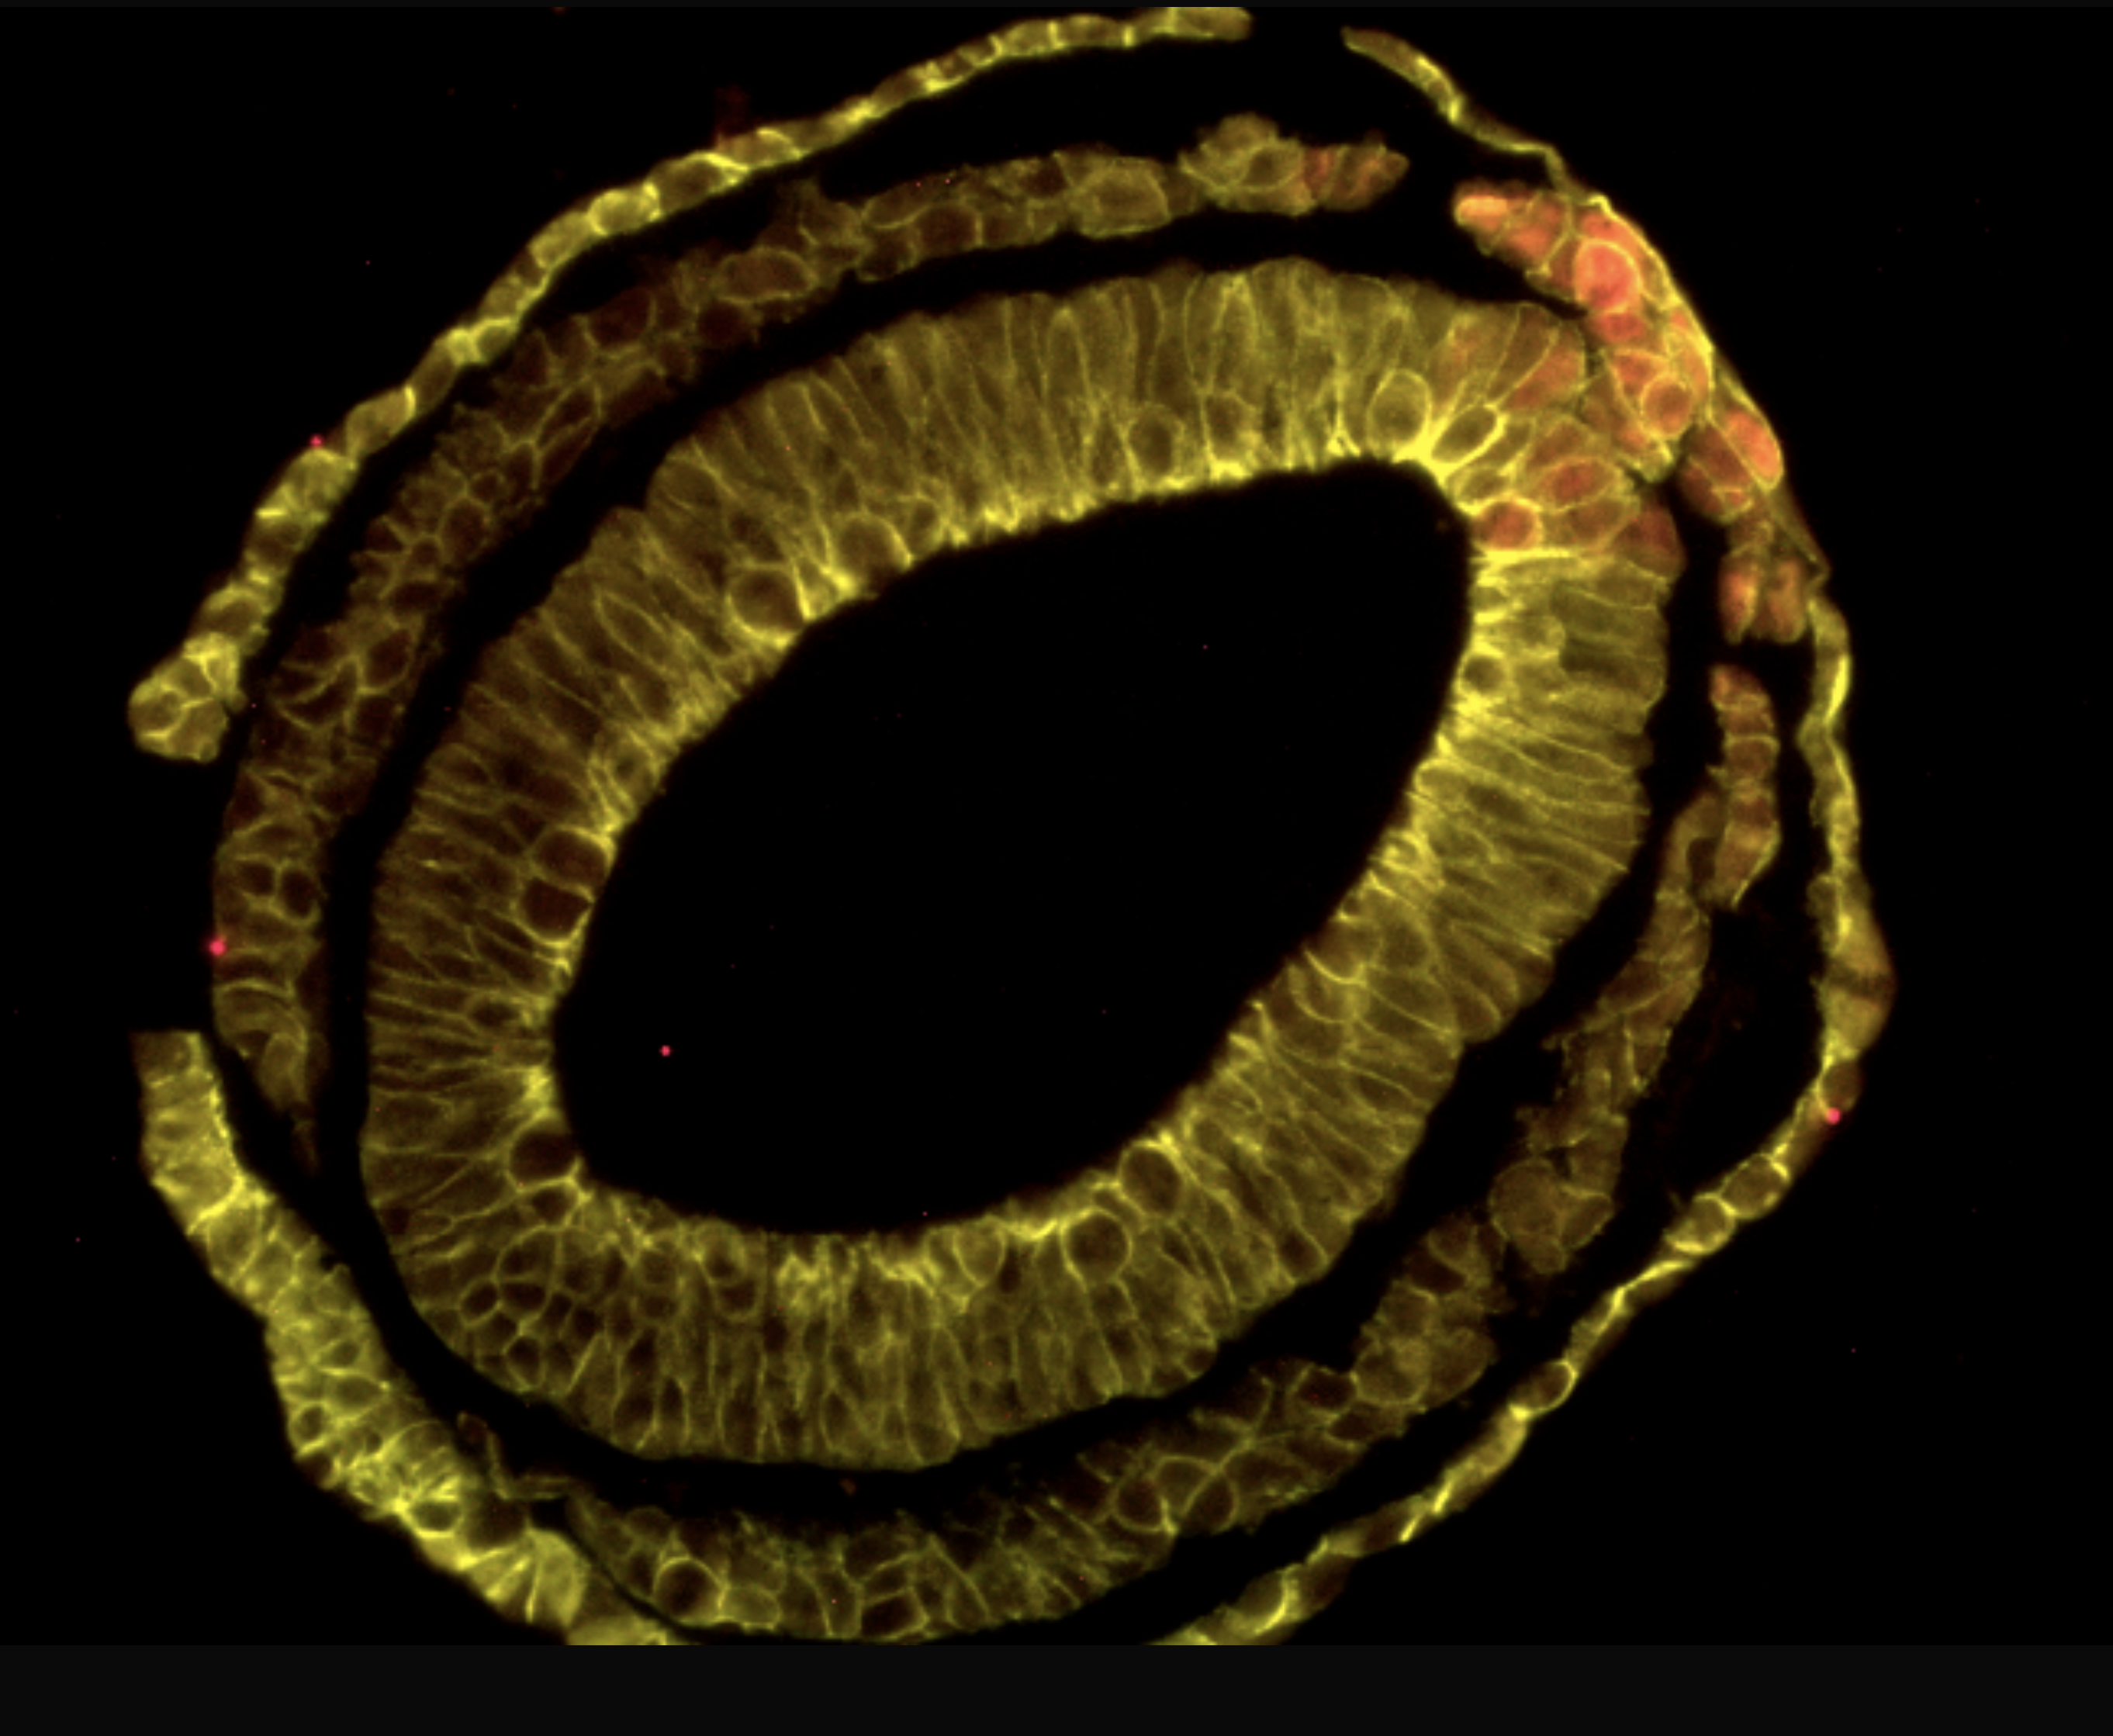 Section of a mouse embryo undergoing gastrulation